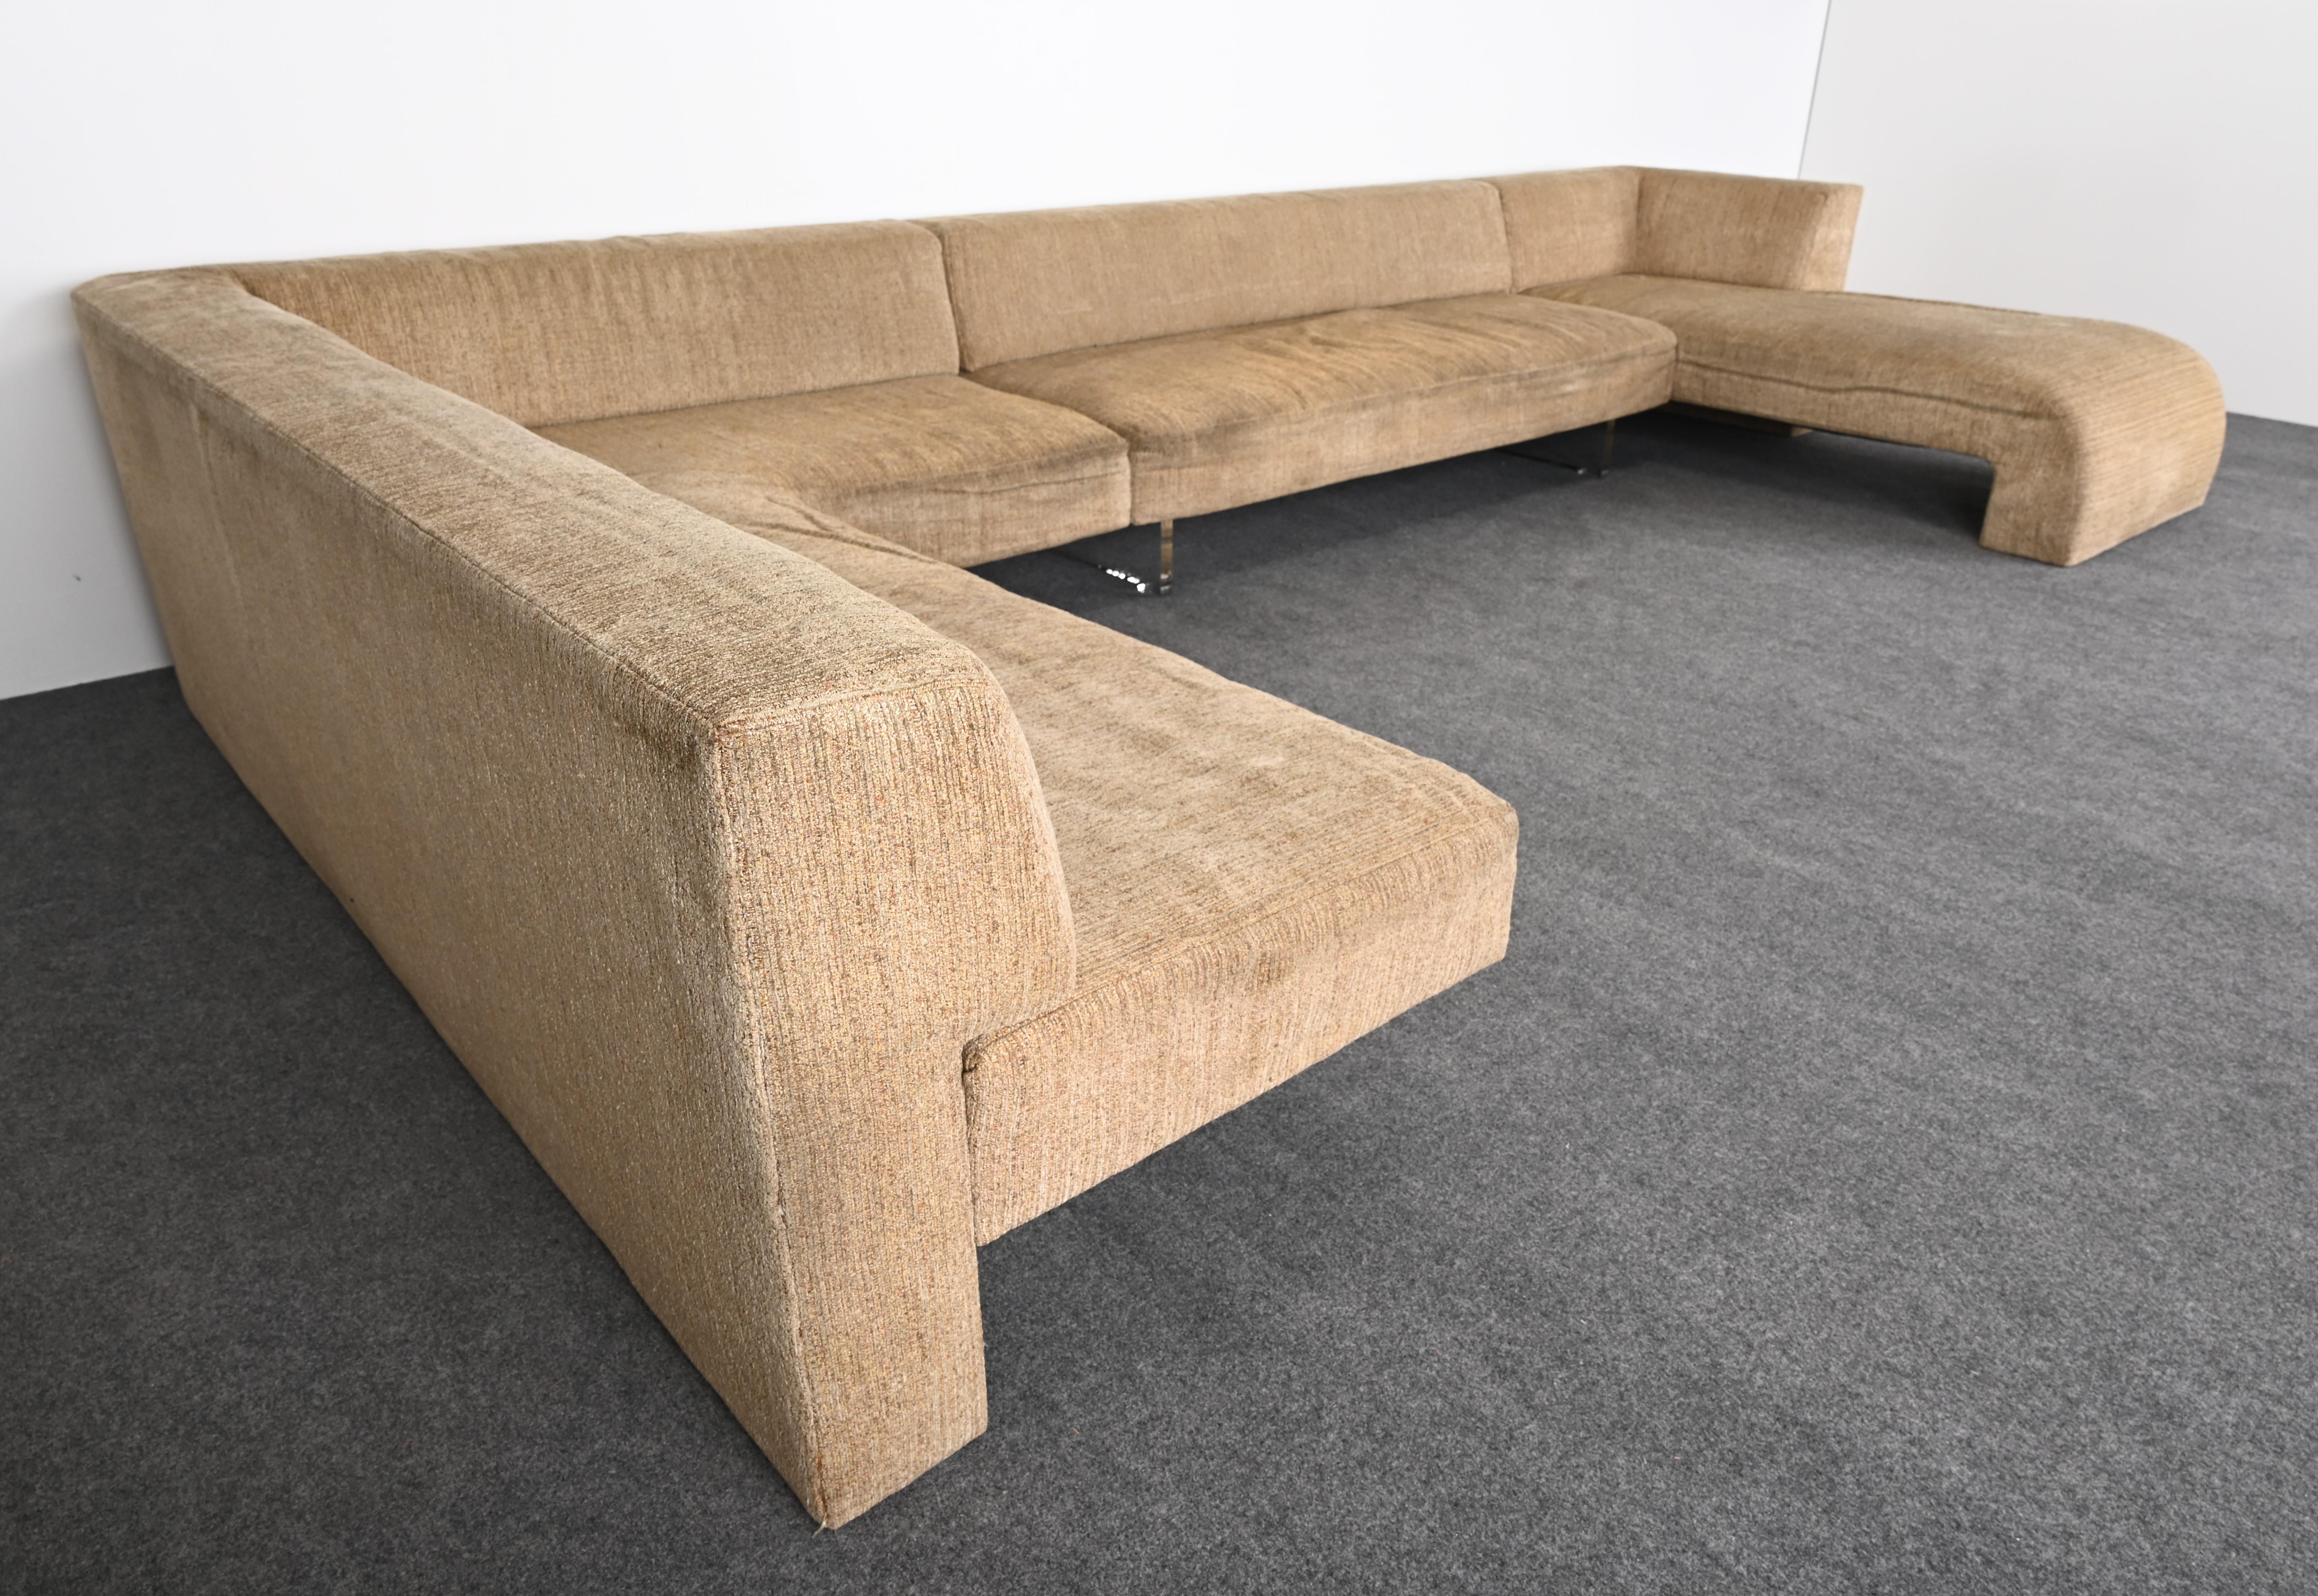 Late 20th Century Monumental Sectional Sofa Designed by Vladimir Kagan, 1970s For Sale